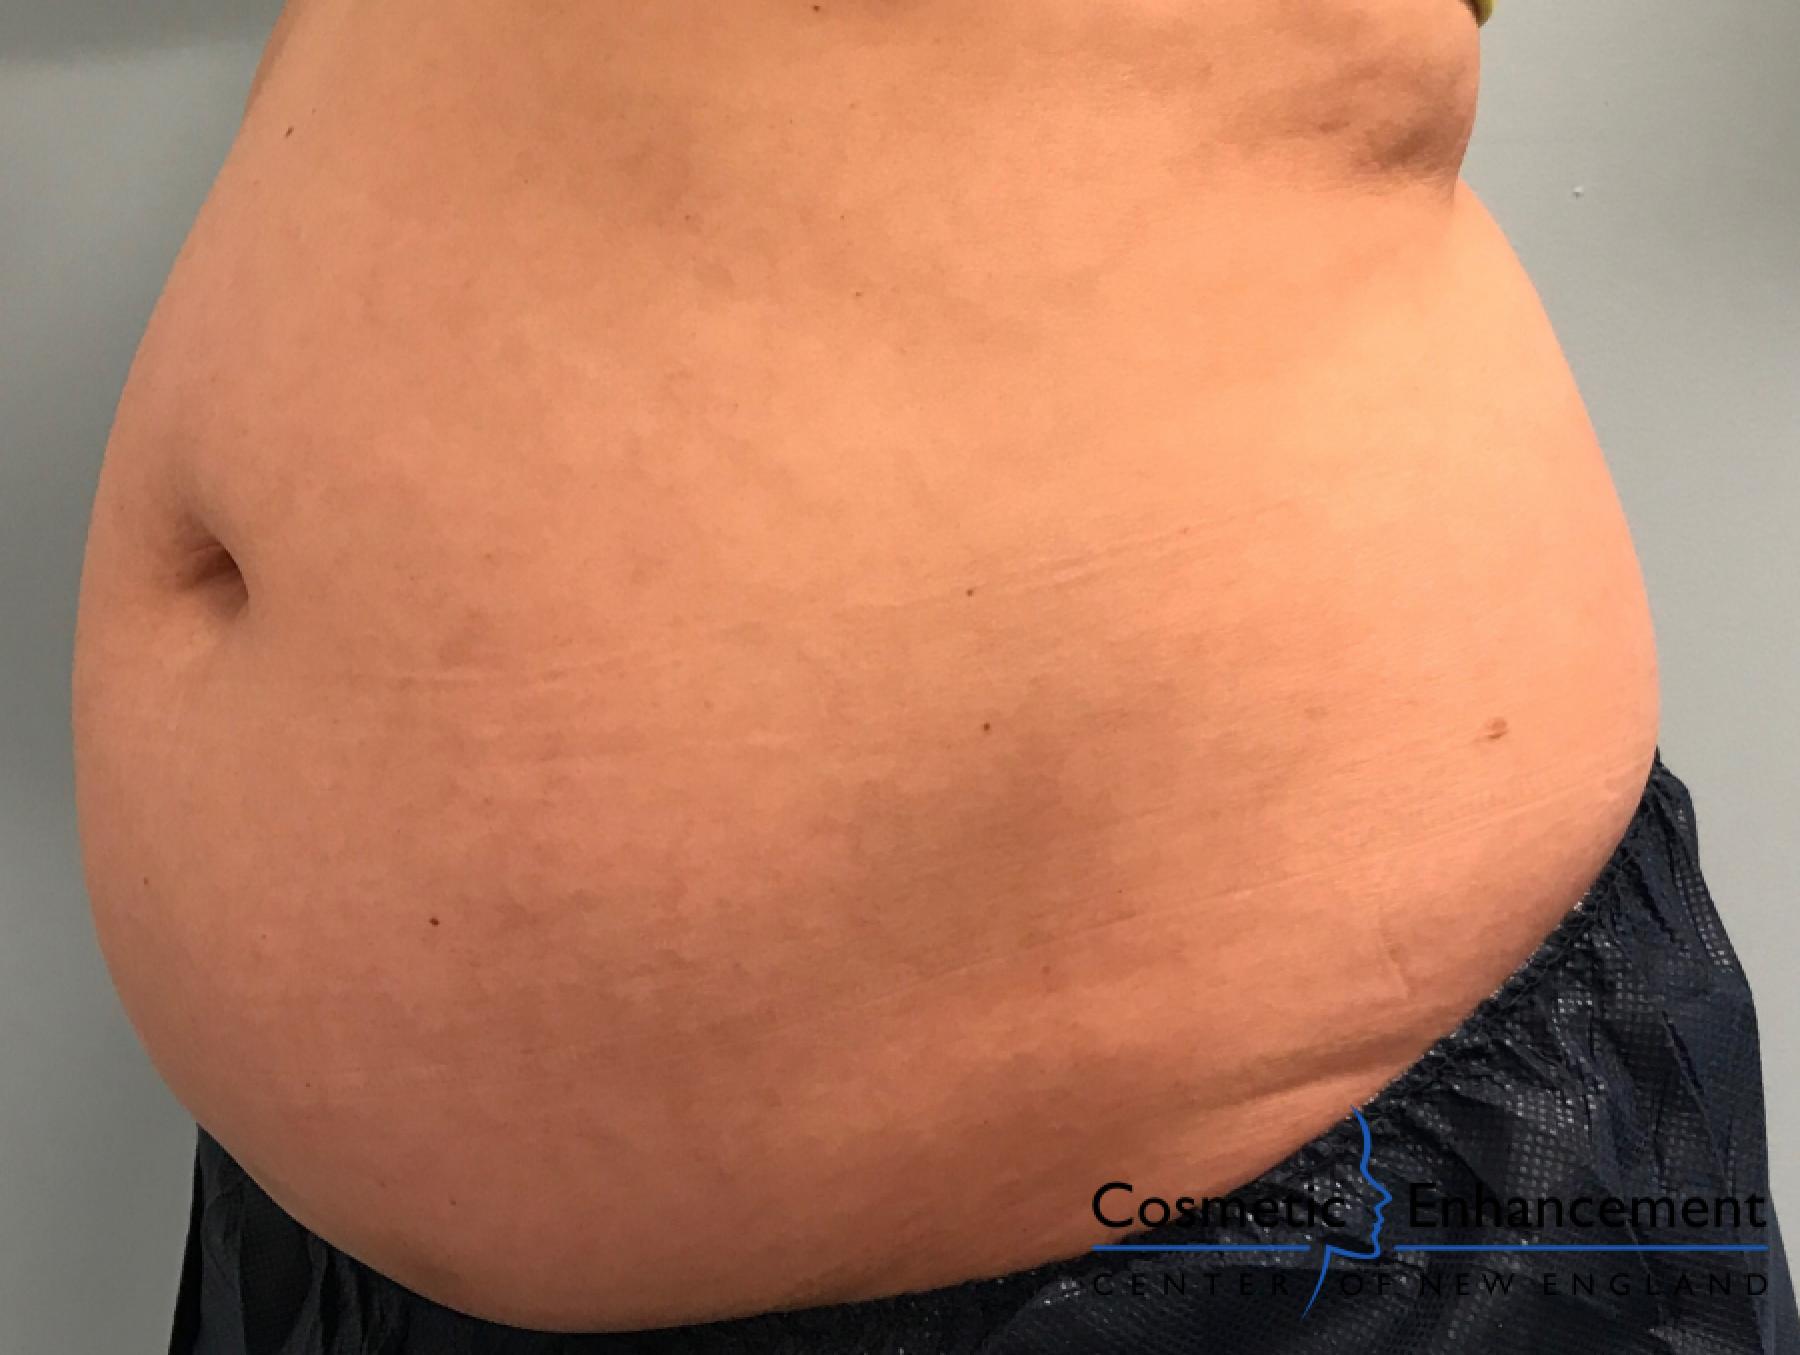 CoolSculpting®: Patient 5 - Before 1